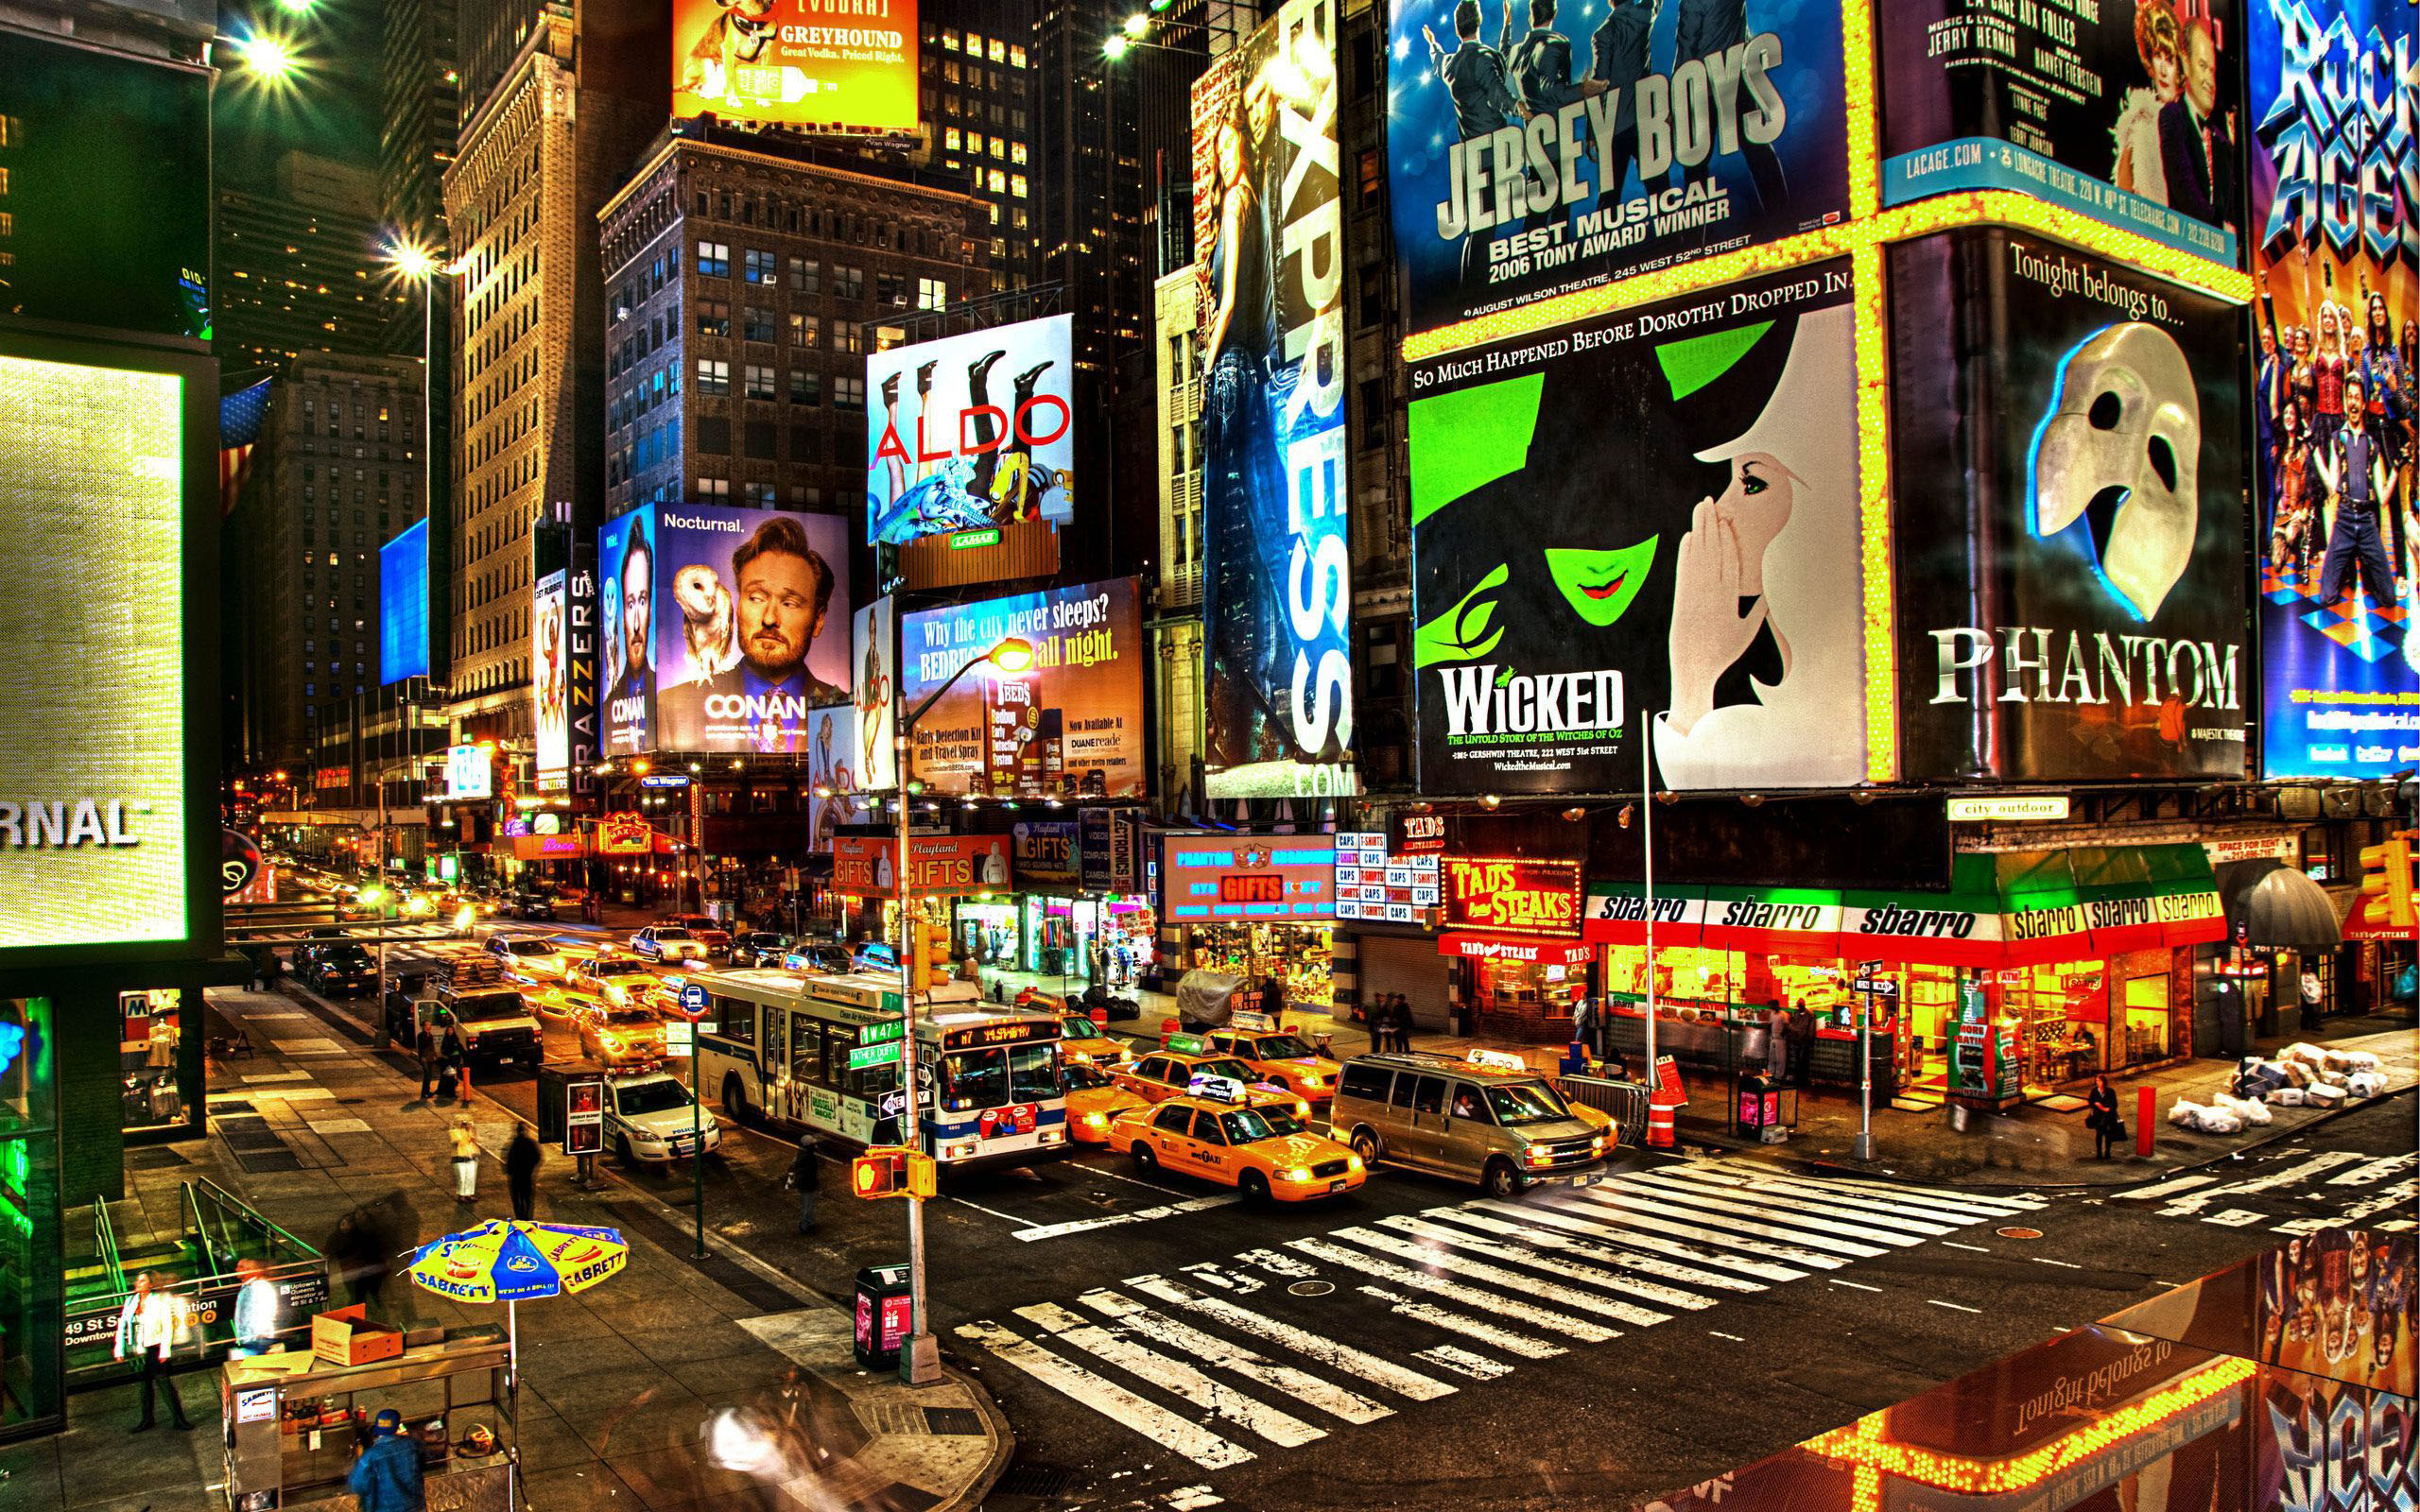 New York City Streets at Night HD Wallpaper Background Images